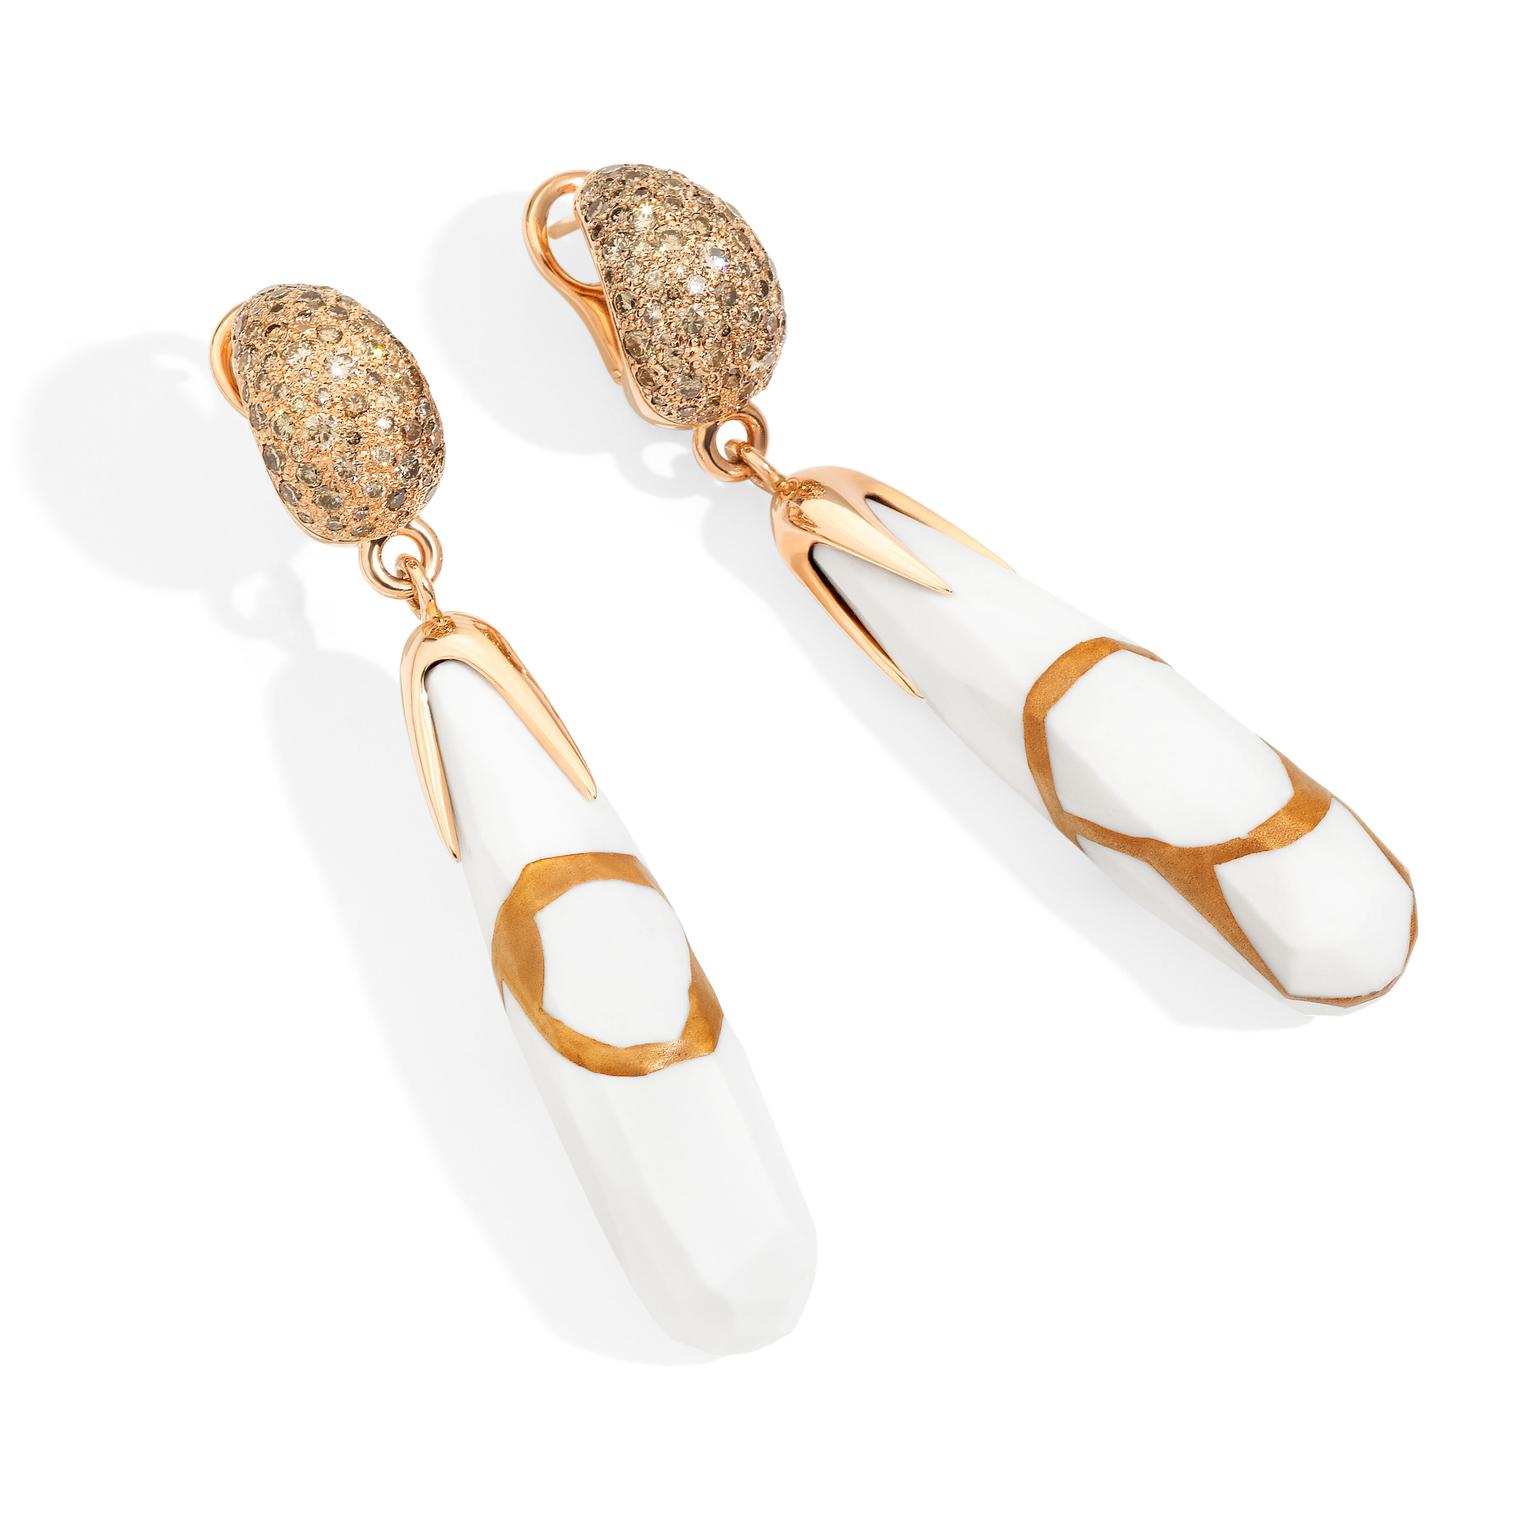 Pomellato Kintsugi Collection_earrings in rose gold with kogolong and brown diamonds